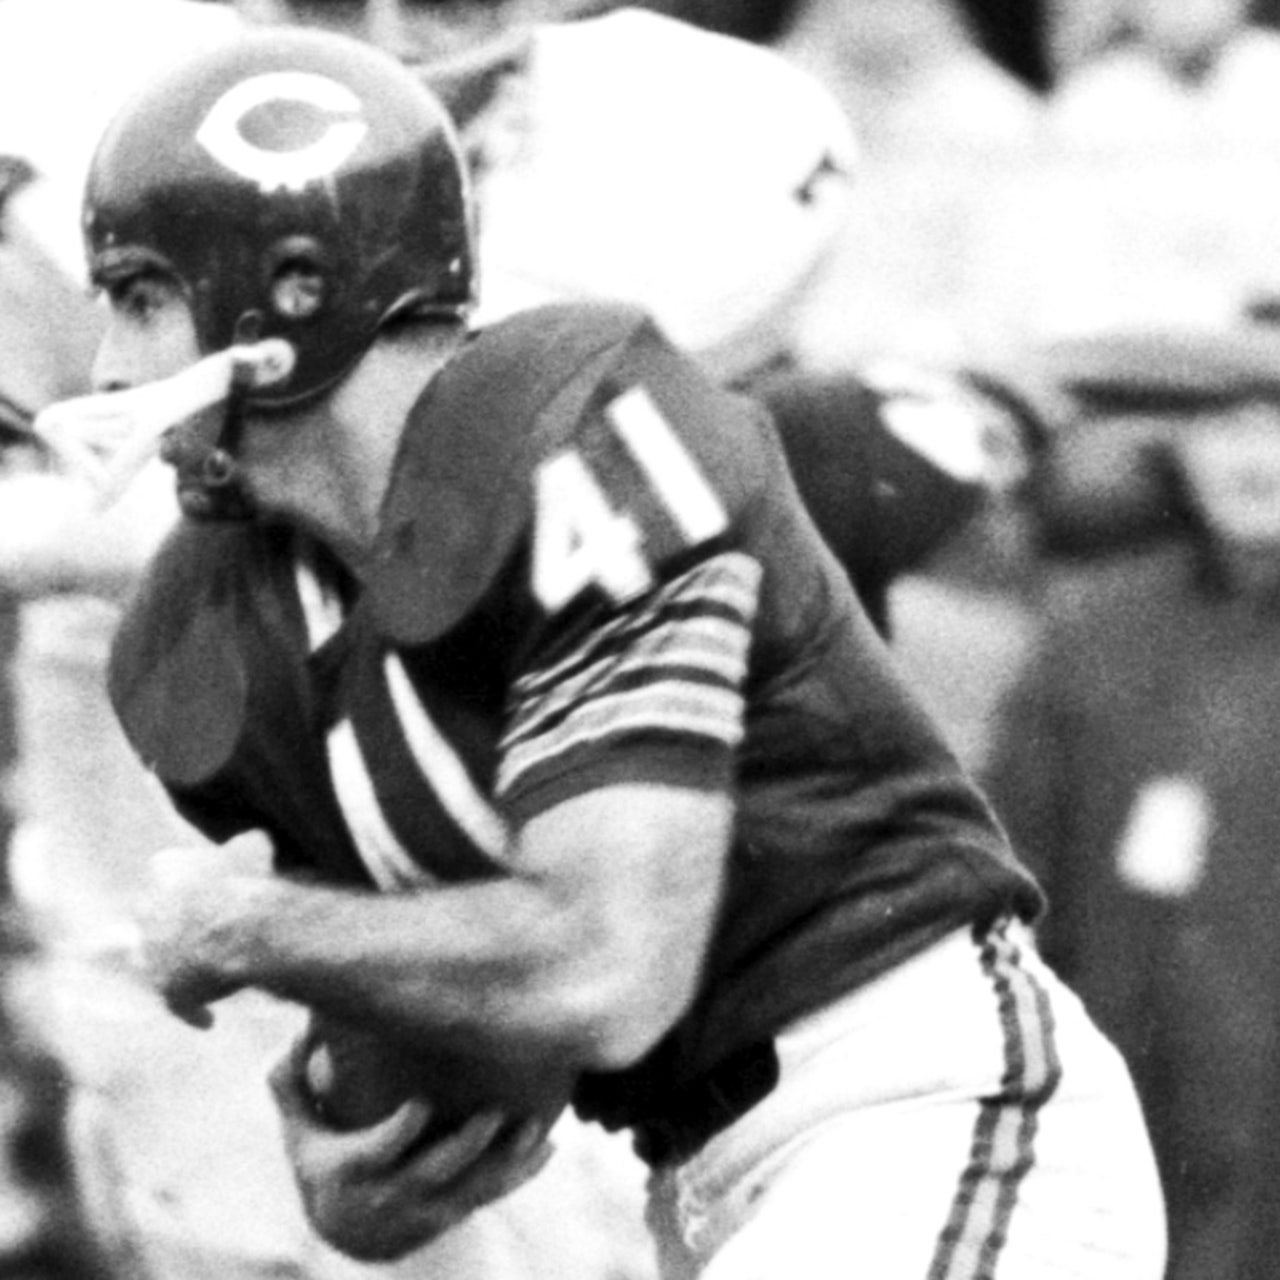 Chicago Bears signed Brian Piccolo 50 years ago -- and he became